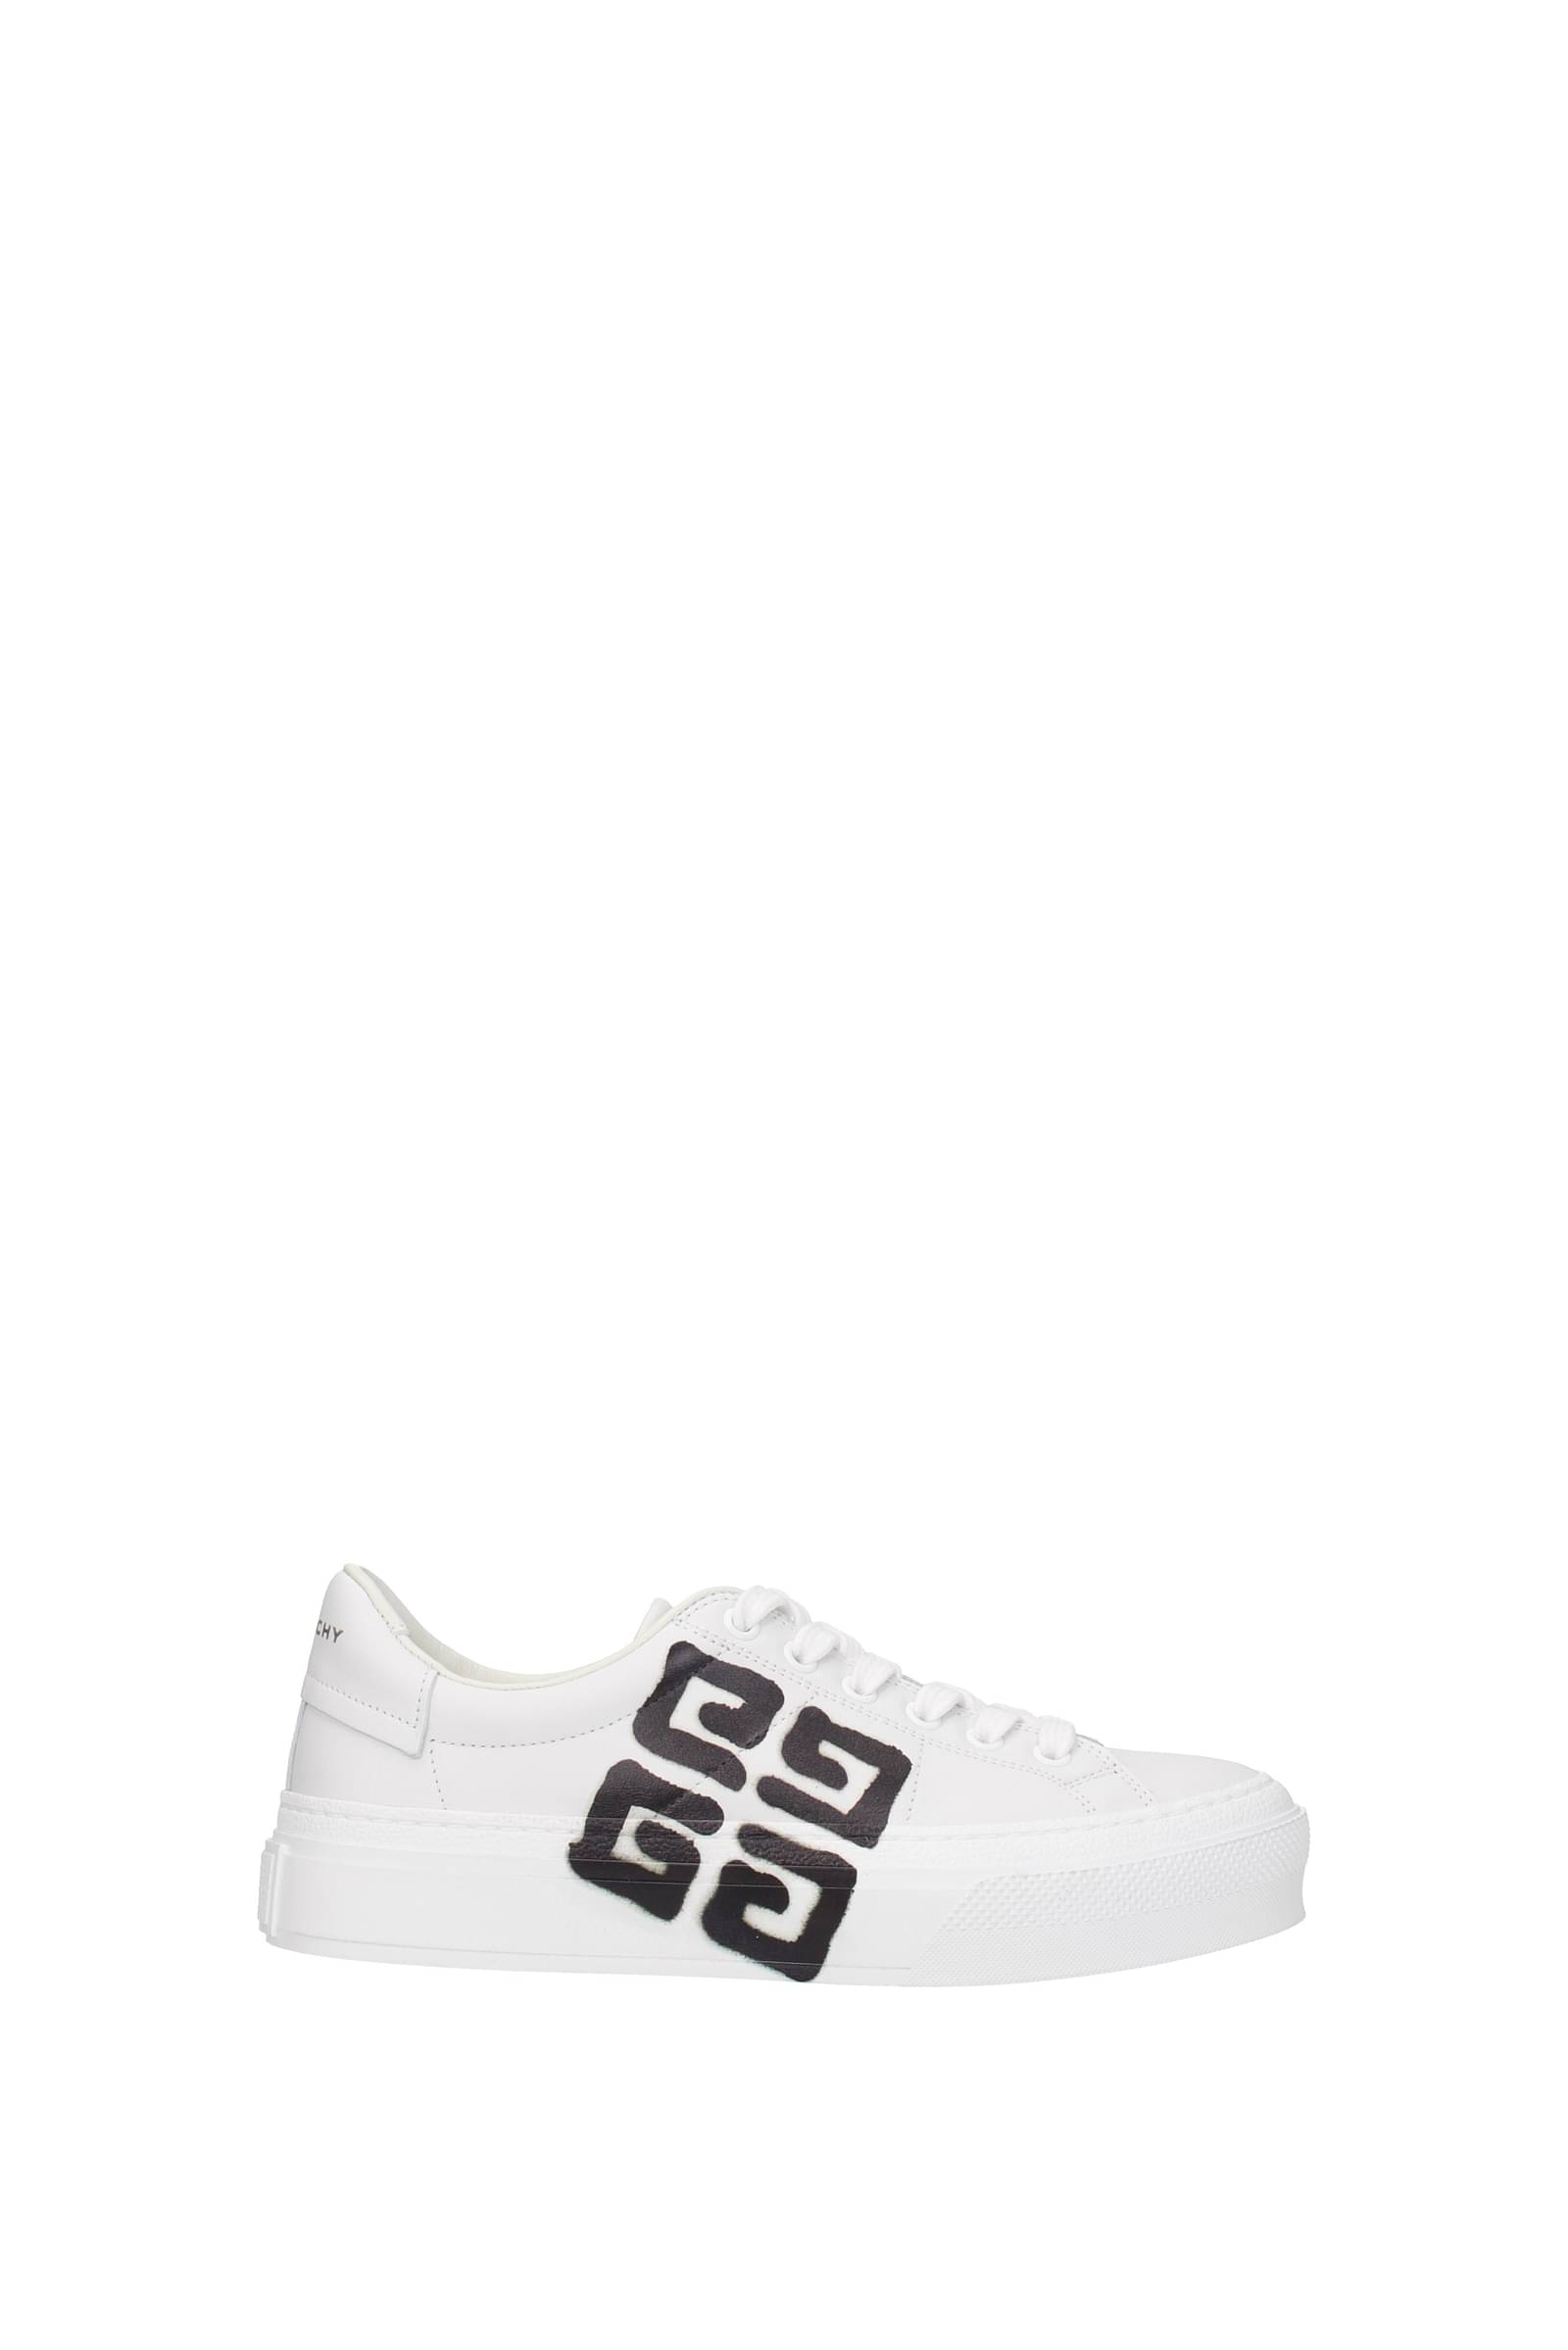 CITY SPORT SNEAKERS WITH GIVENCHY BAND BH005XH14X/116 | Bruna Rosso